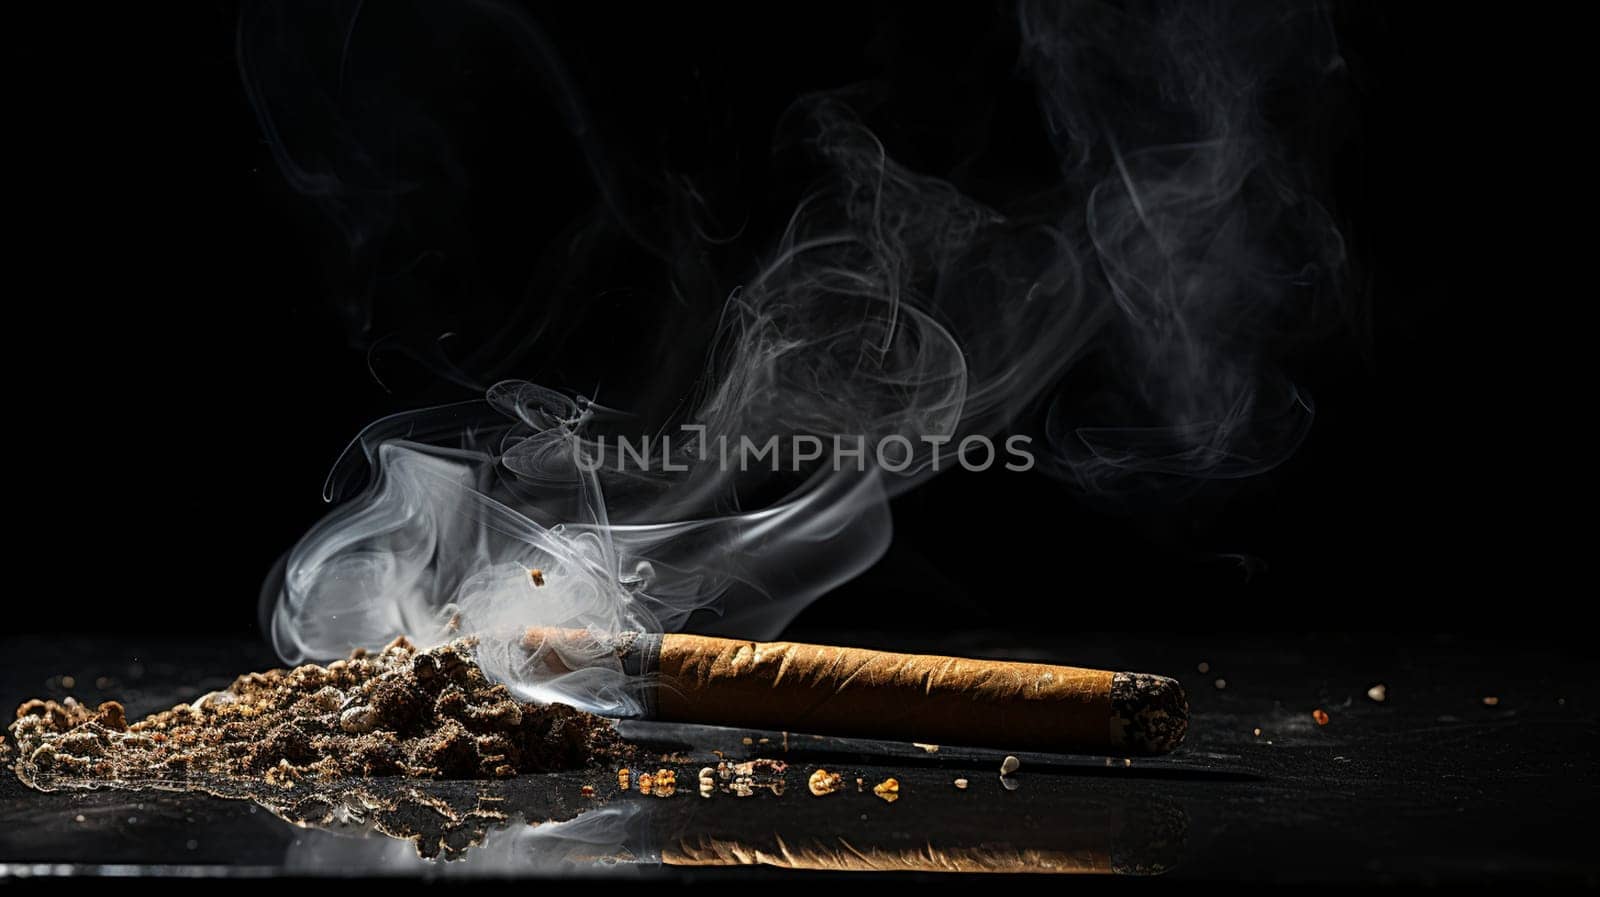 Cigarette ashes with skull.Tobacco cigarette butt on black background.World No Tobacco Day Concept Stop Smoking. High quality photo